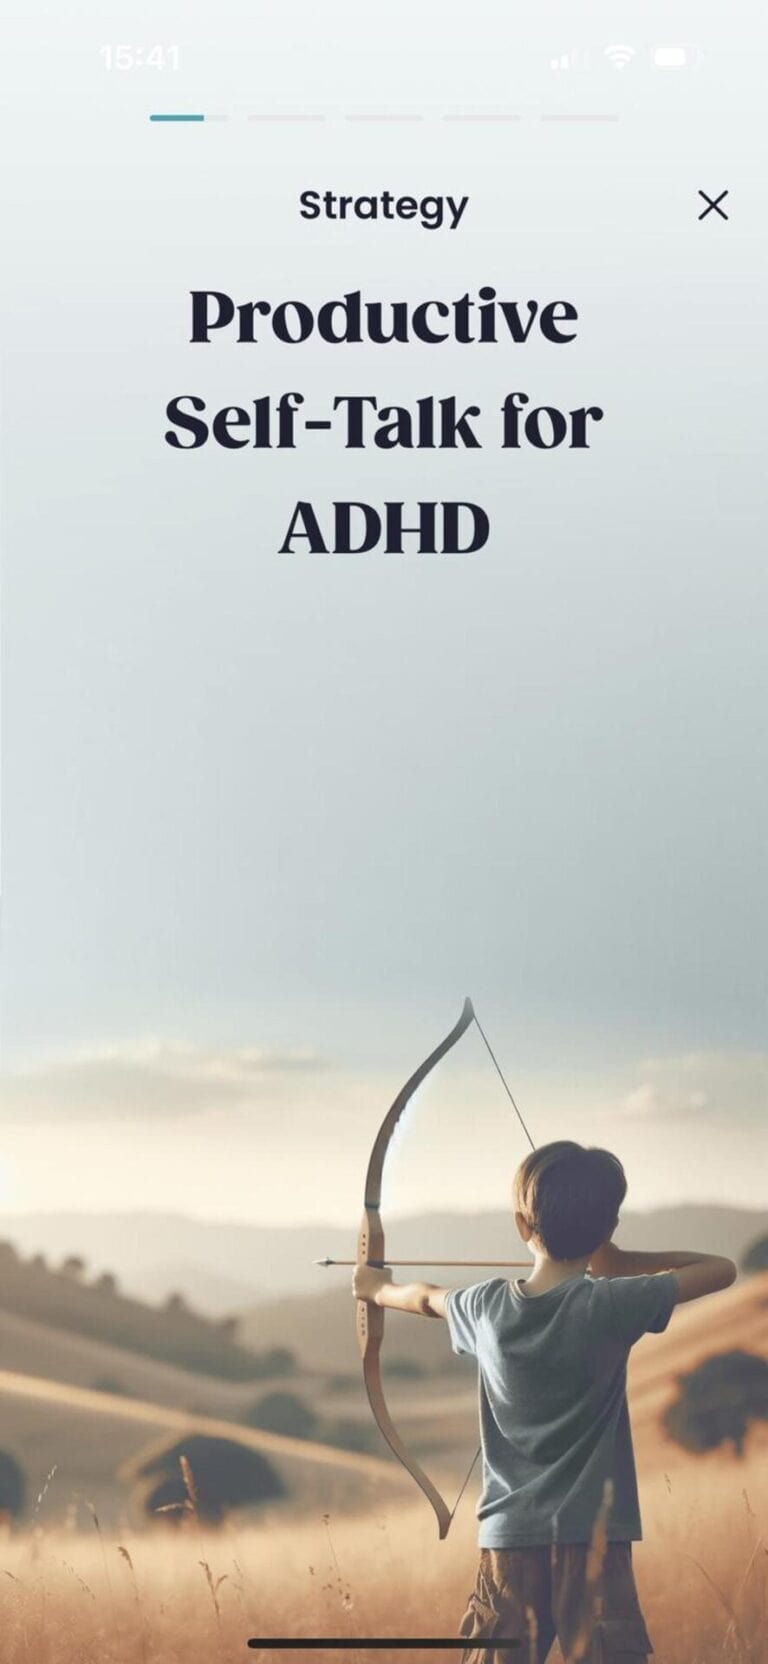 Pery offers strategies for day-to-day life with ADHD. Photo: screenshot